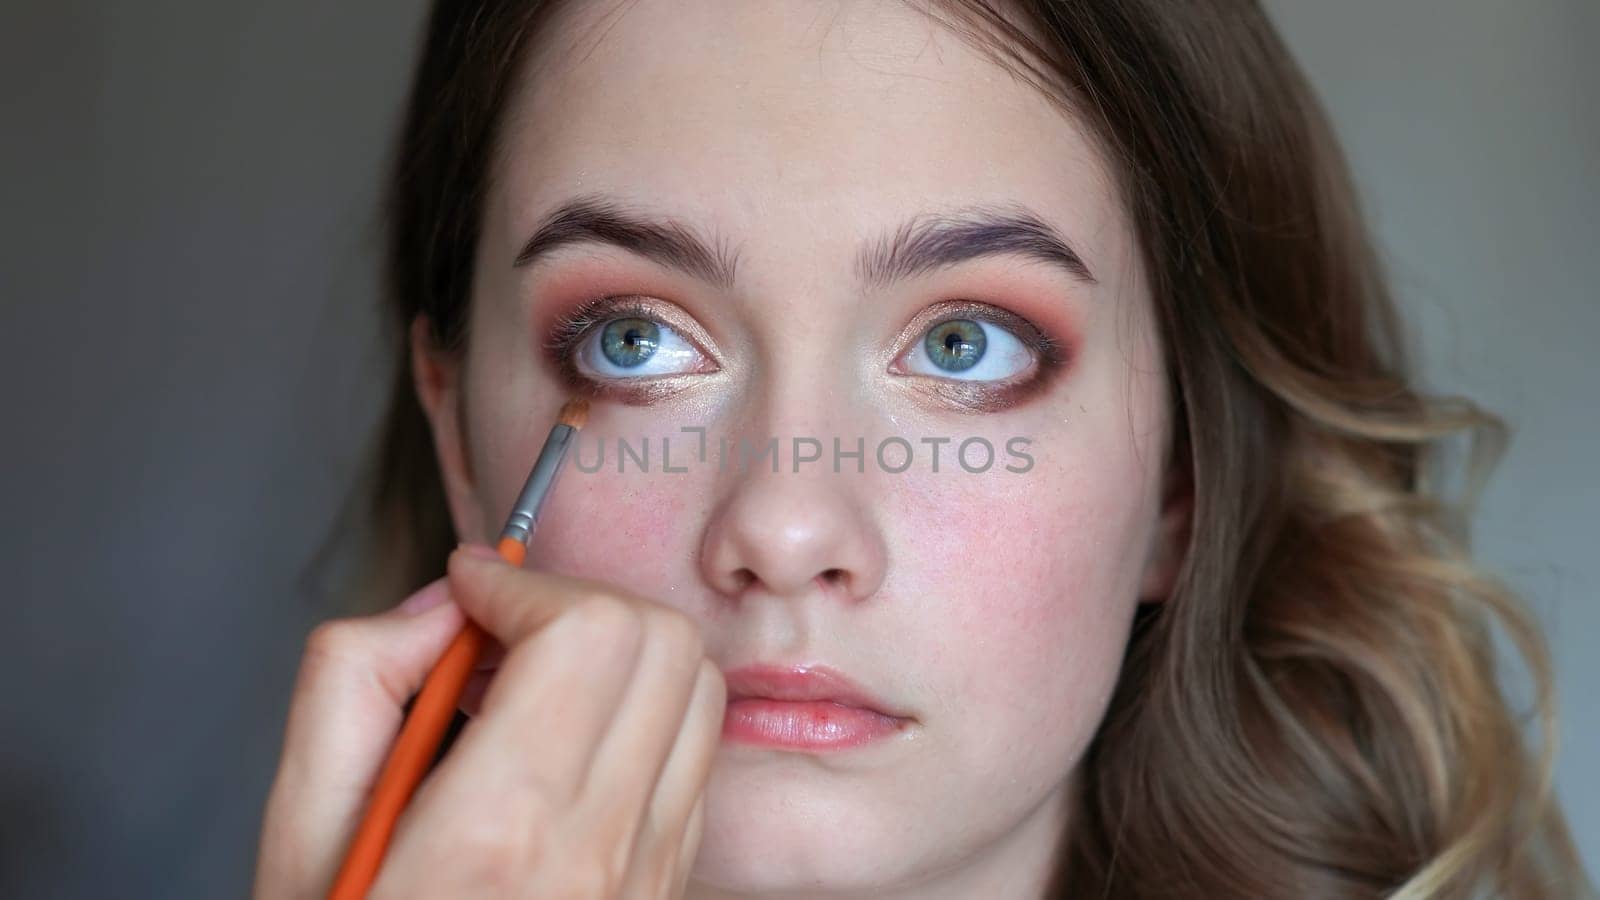 Girl makeup artist paints the eyes of a young girl by DovidPro